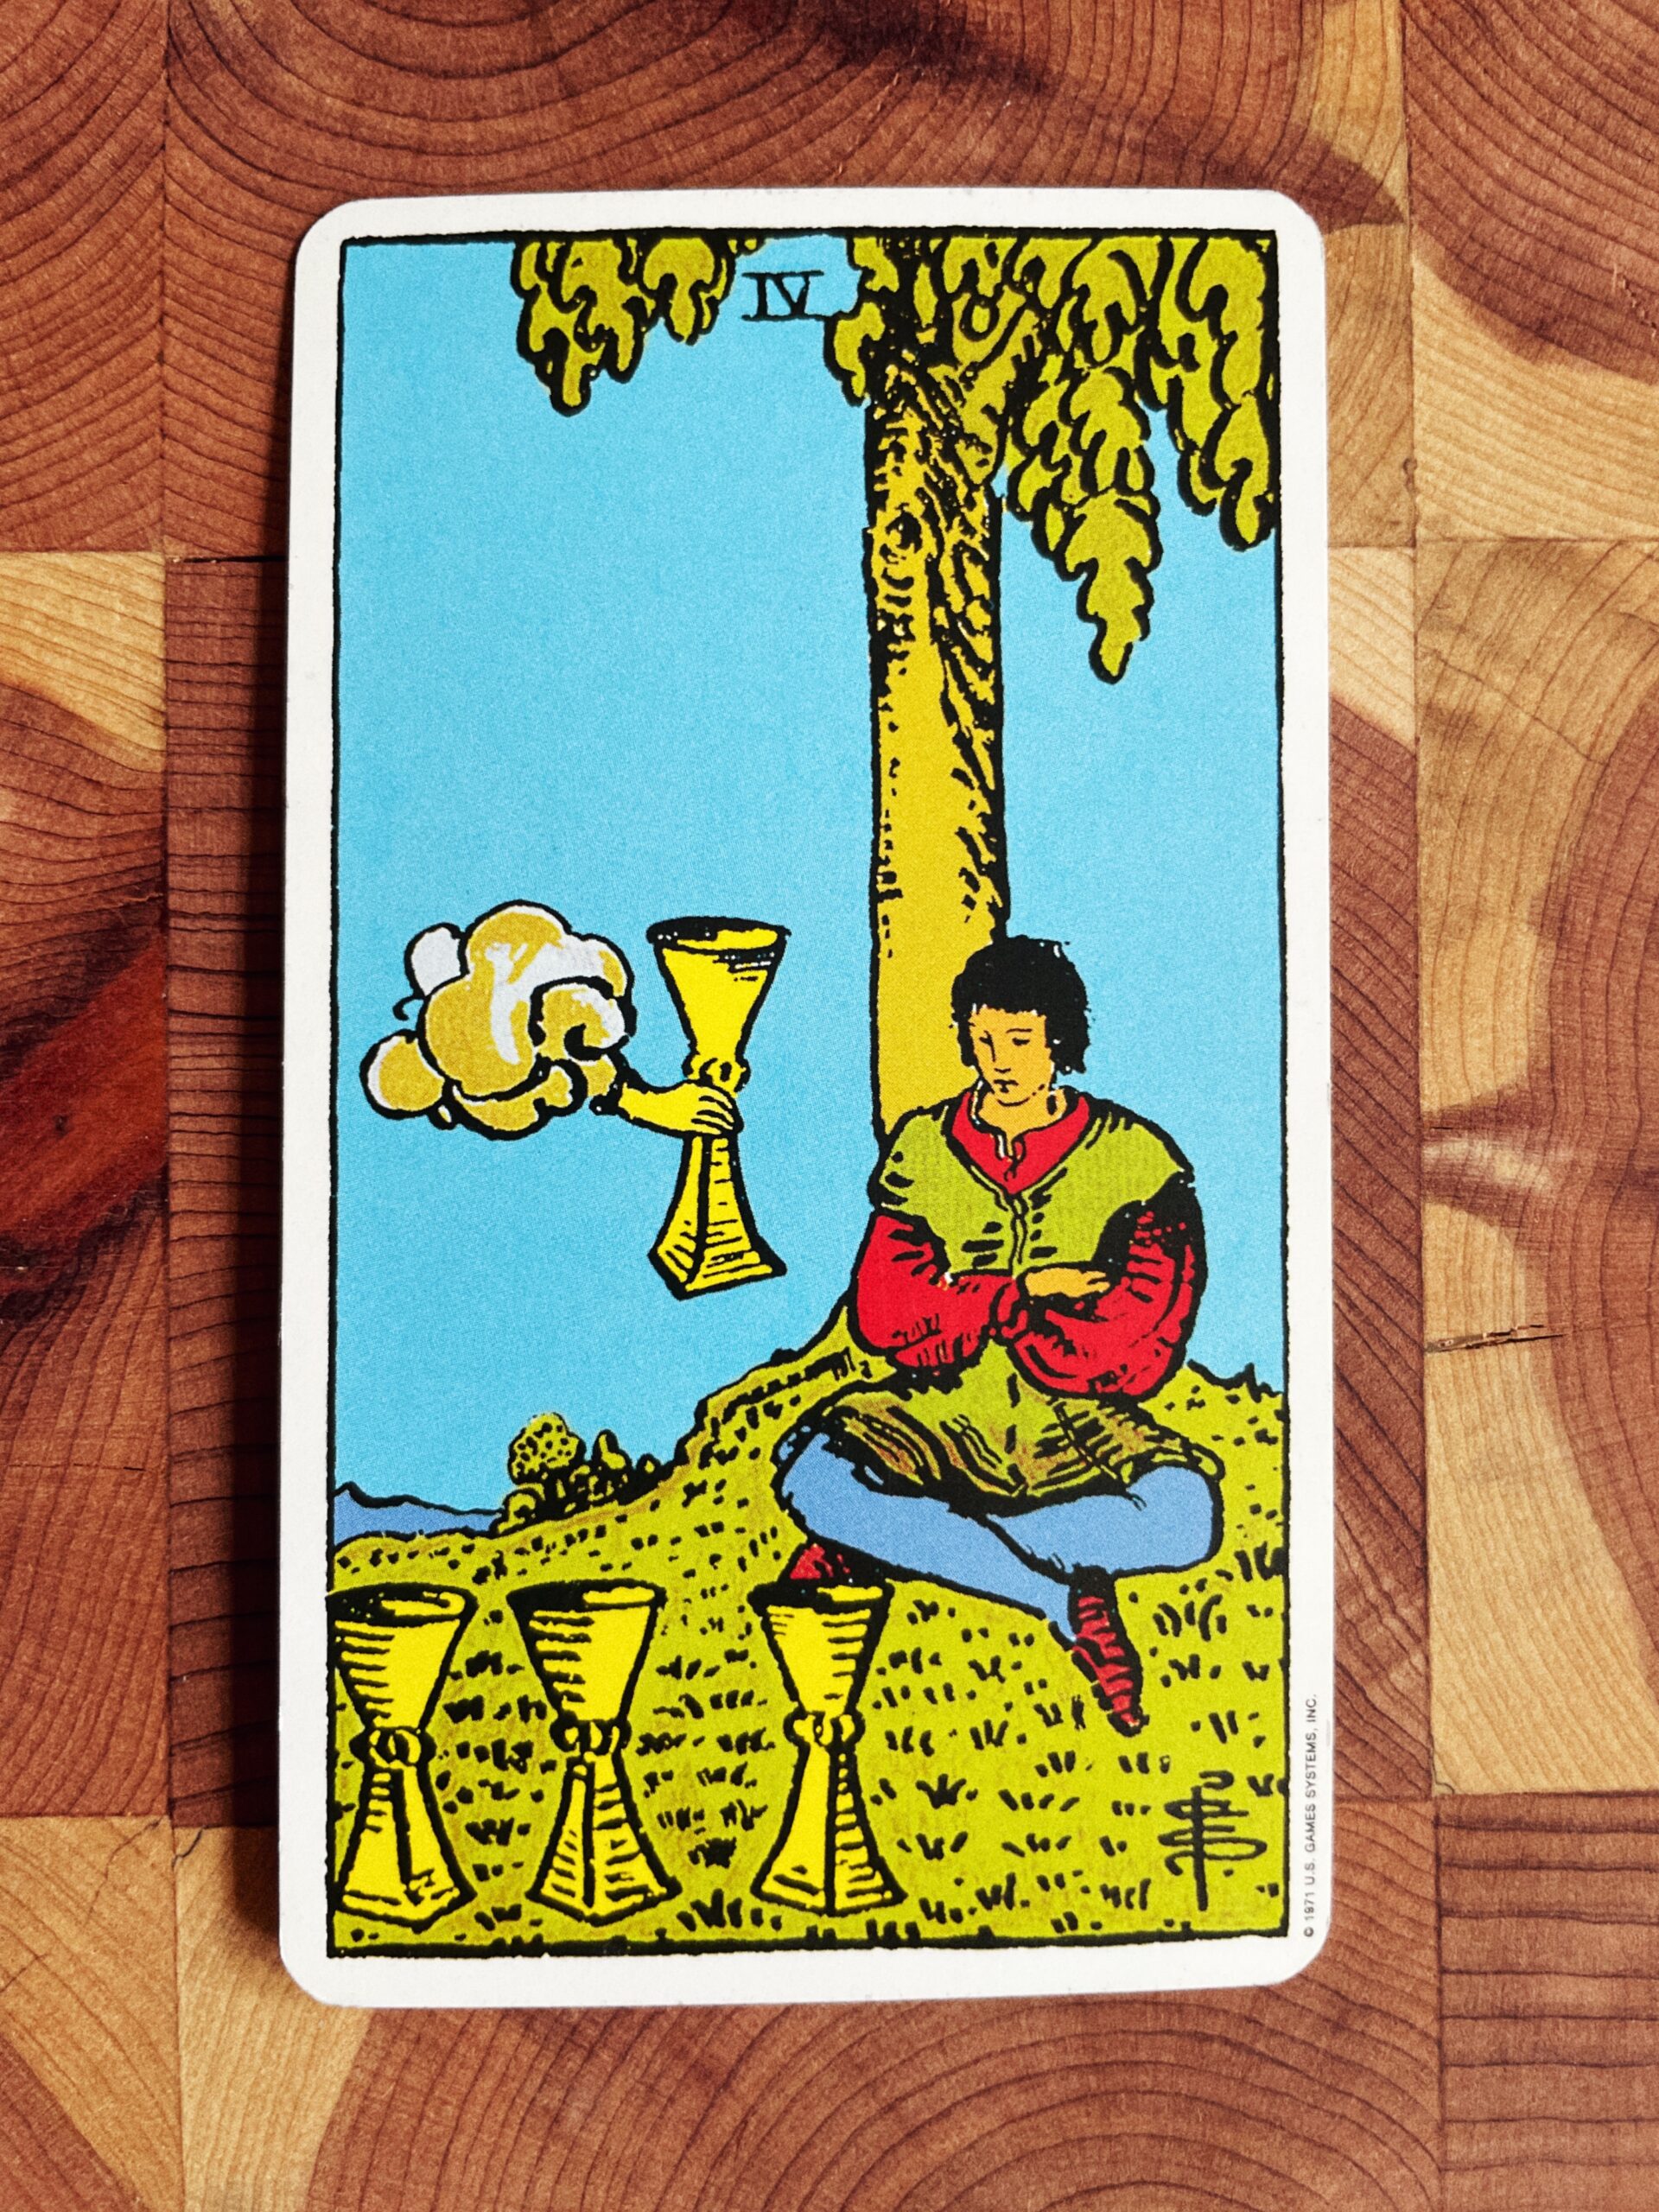 4 of Cups Rider Waite Tarot Deck. A hand outstretches a forth cup to a single man, three cups sit in the foreground. 